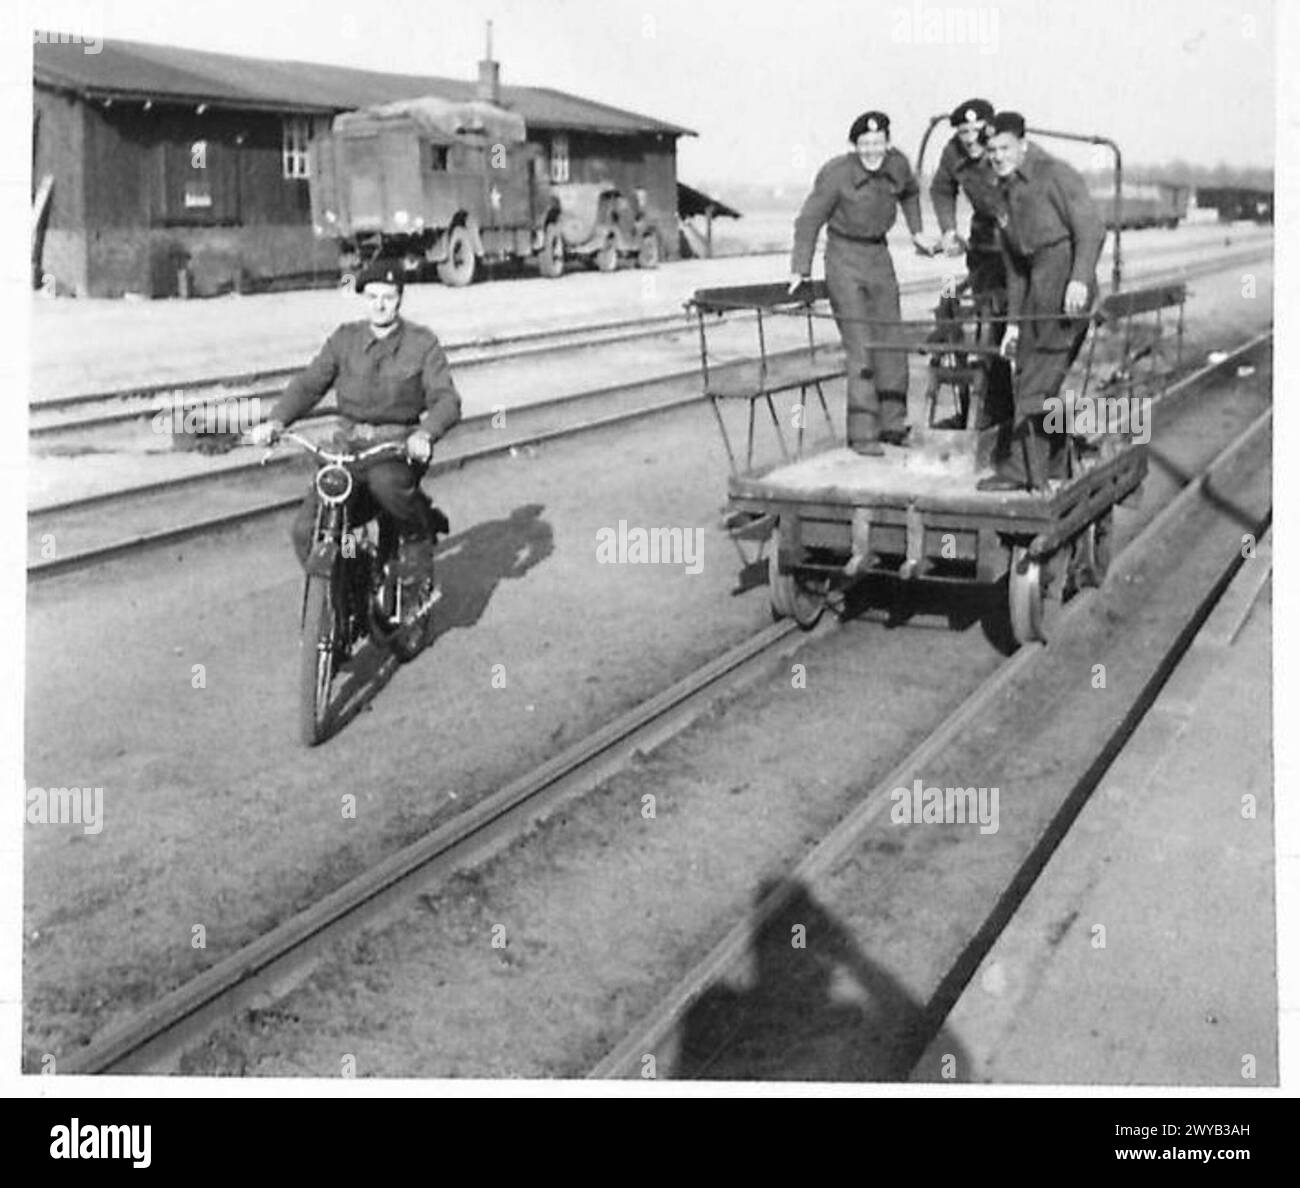 MILITARY GOVERNMENT IN BRUCHHAUSEN-VILSEN AND SYKE - Original wartime caption: At Bruchhausen-Vilsen, British troops used a rail trolley to convey them from billets to mess place, while one has a captured motorcycle. Photographic negative , British Army, 21st Army Group Stock Photo